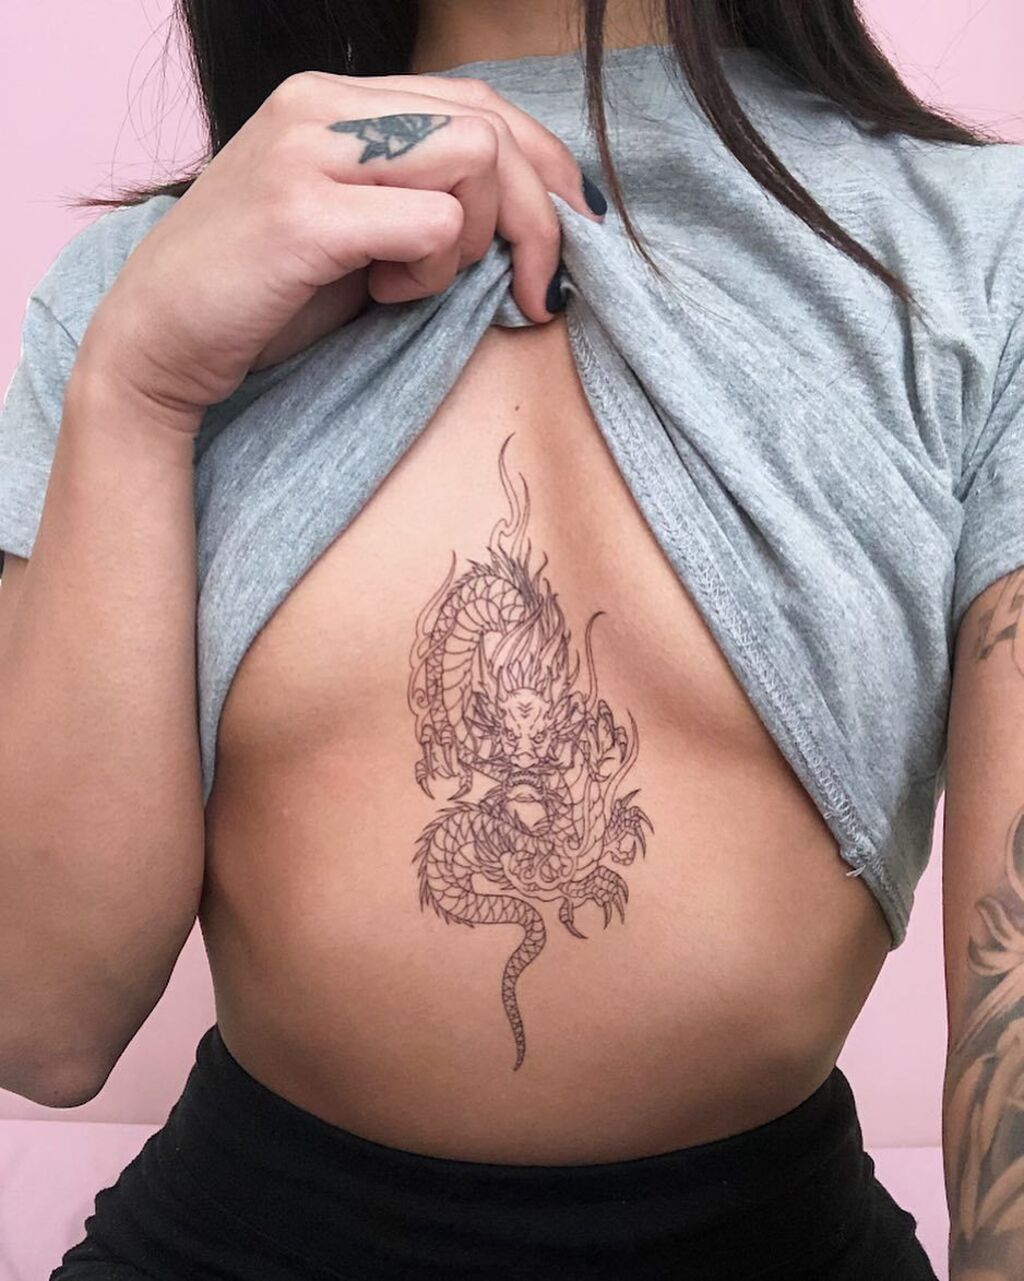 A woman with a dragon tattoo under her breast
